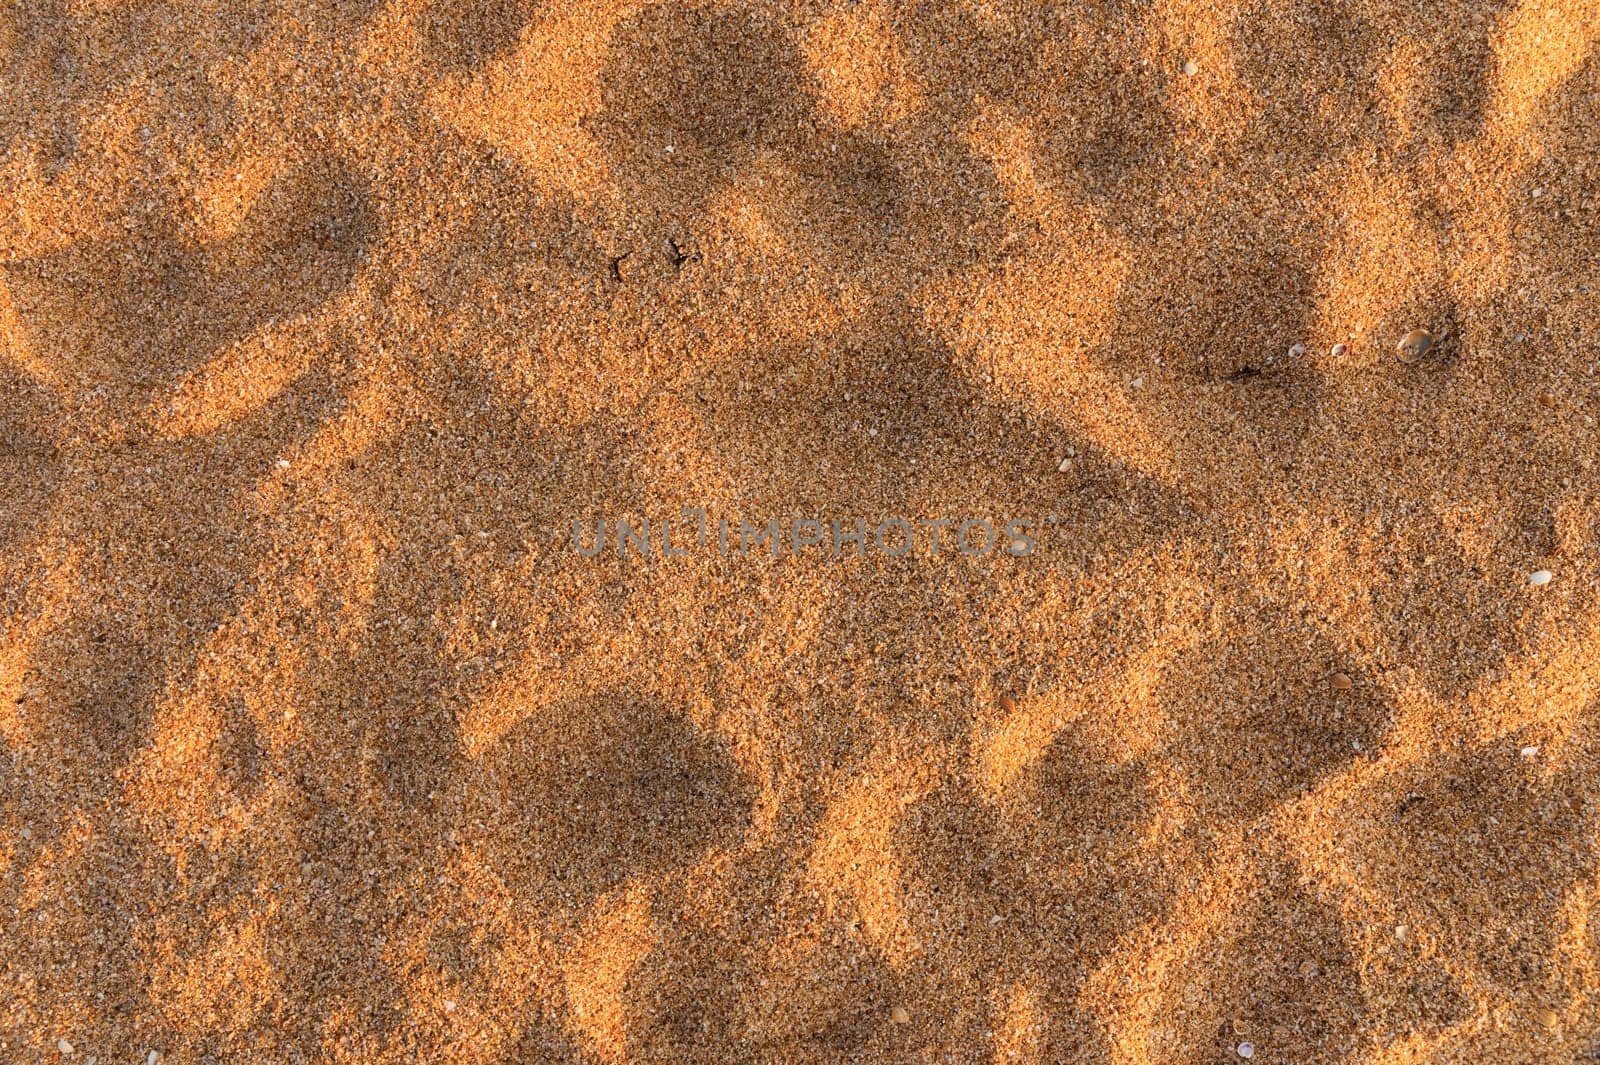 Yellow lumpy sand background on the beach in side sunset light. Rich Image.